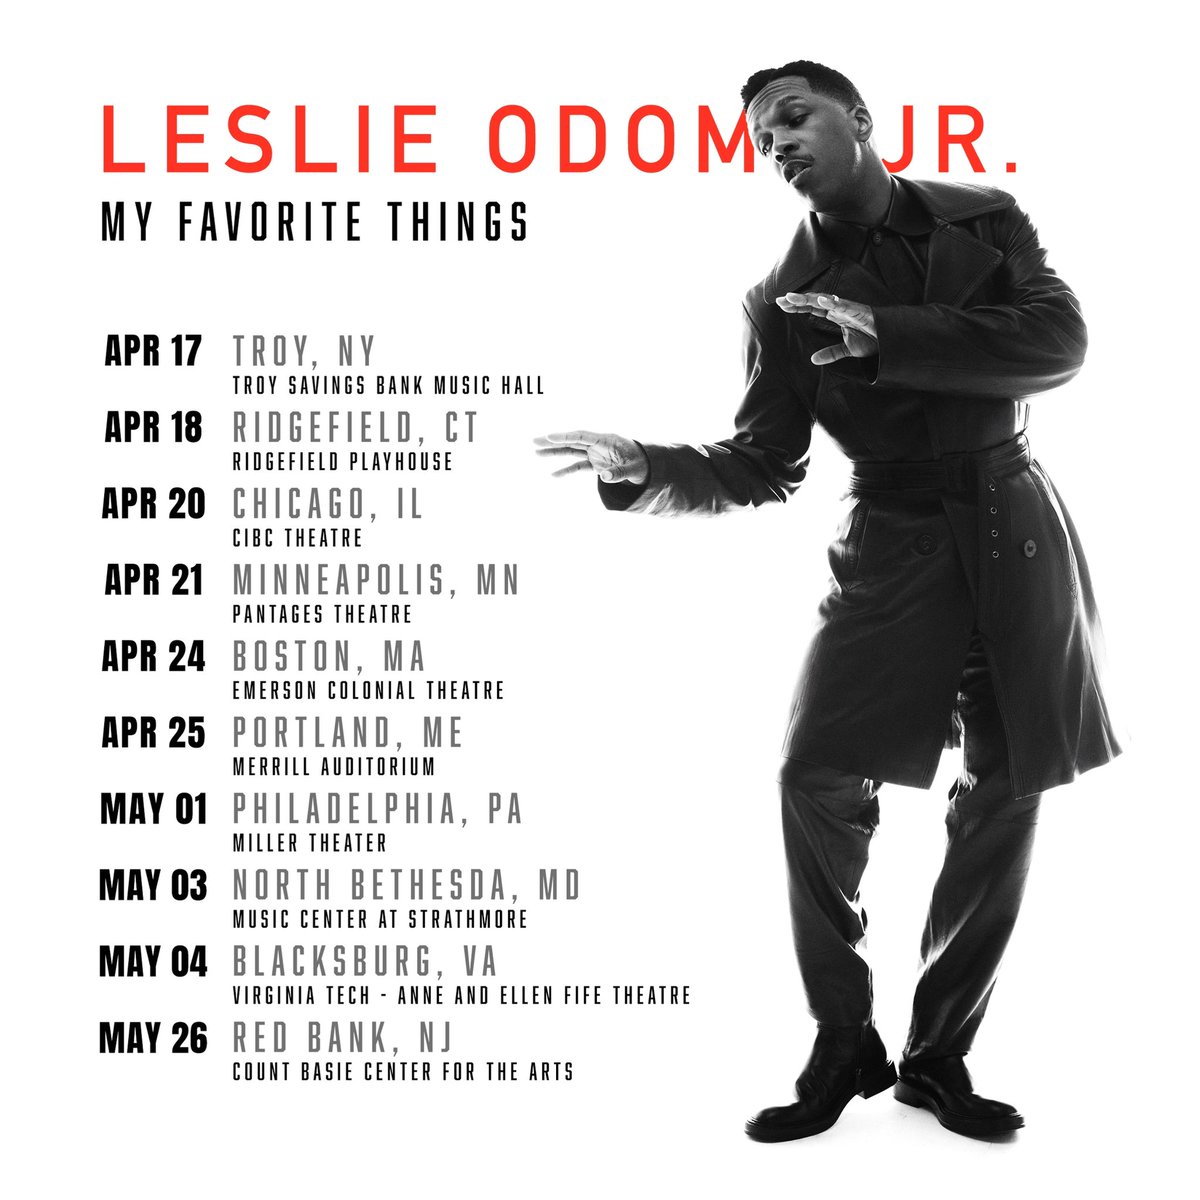 Silver white winters that melt into spring live music dates 🎵 A few of my very favorite things. See you there! leslieodomjr.com